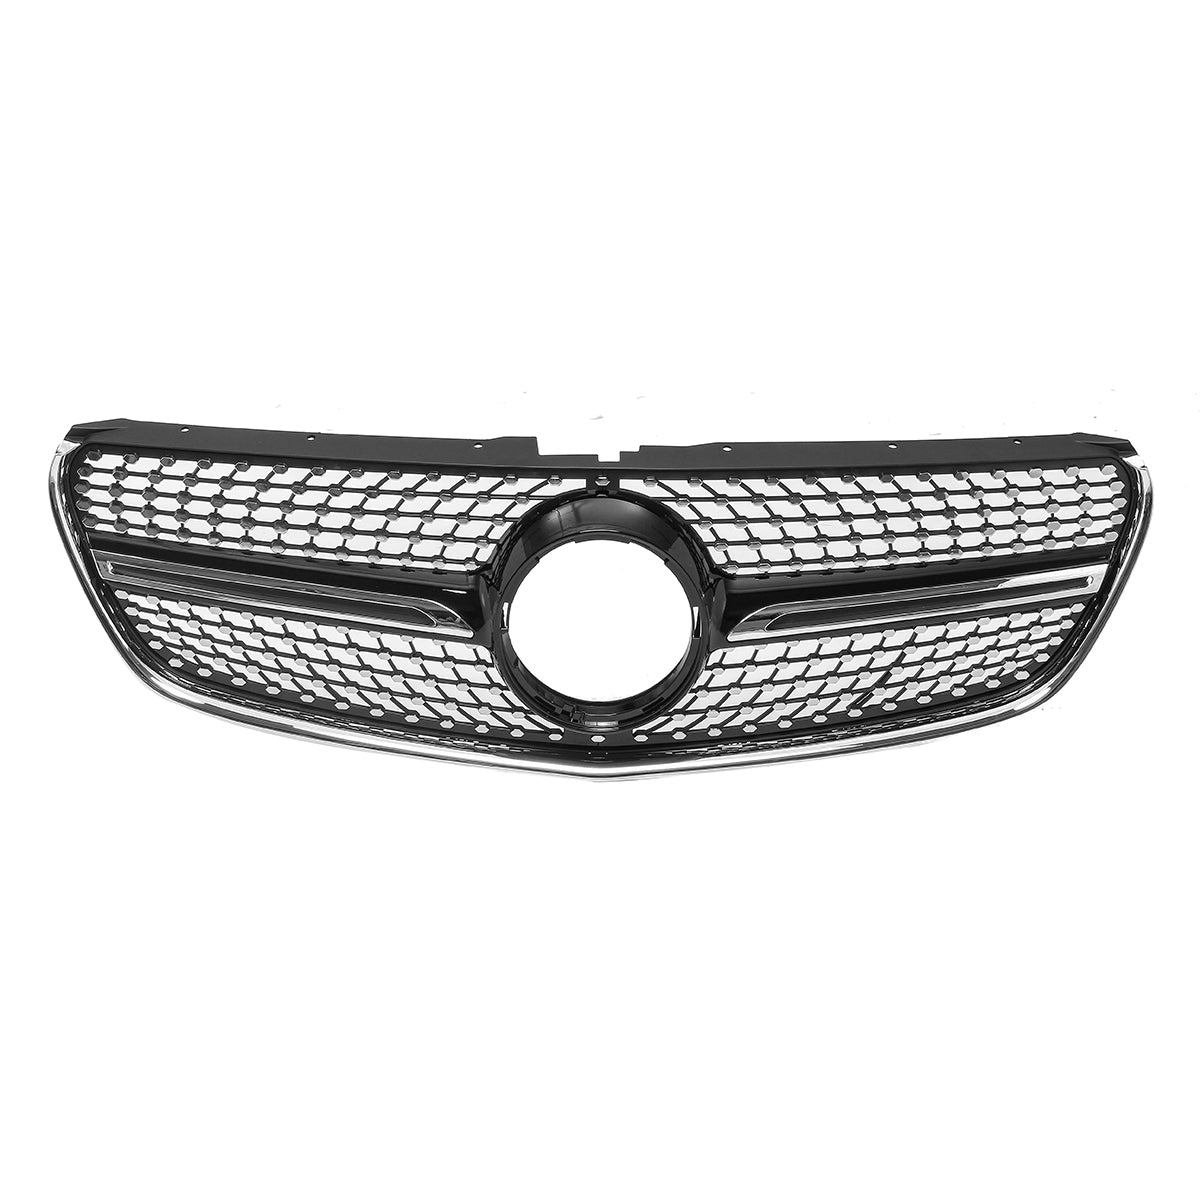 Dark Slate Gray Black Diamond Front Grille for Mercedes W447 V-Class V200 220 250 260 15-18 Without CAMERA